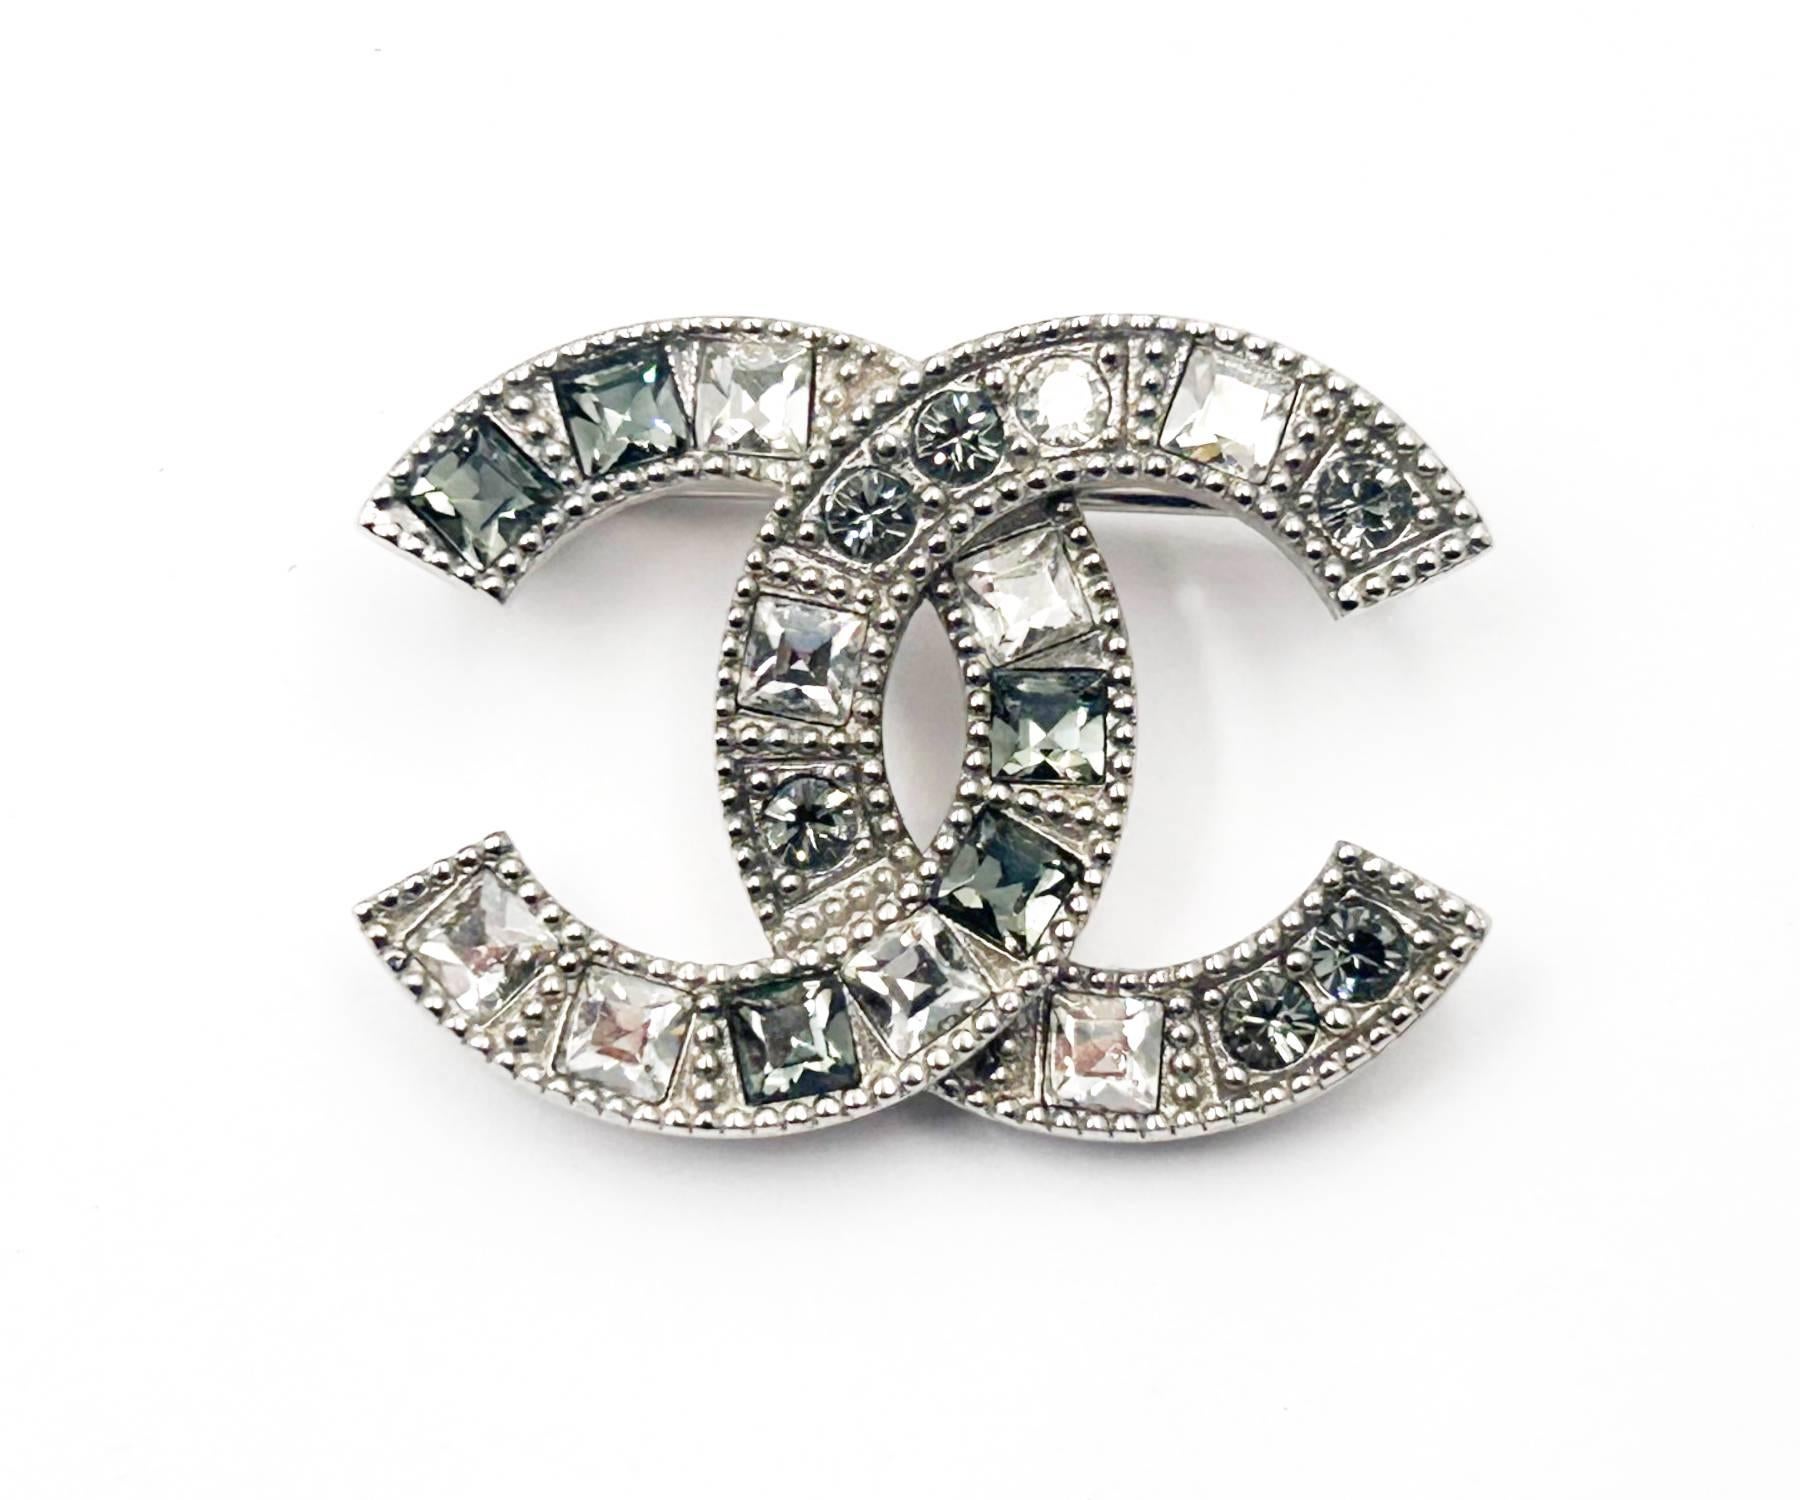 Chanel Silver CC Grey Princess Square Round Crystal Small Brooch

*Marked 15 
*Made in Italy
*Comes with the original box

-It's approximately 1.25